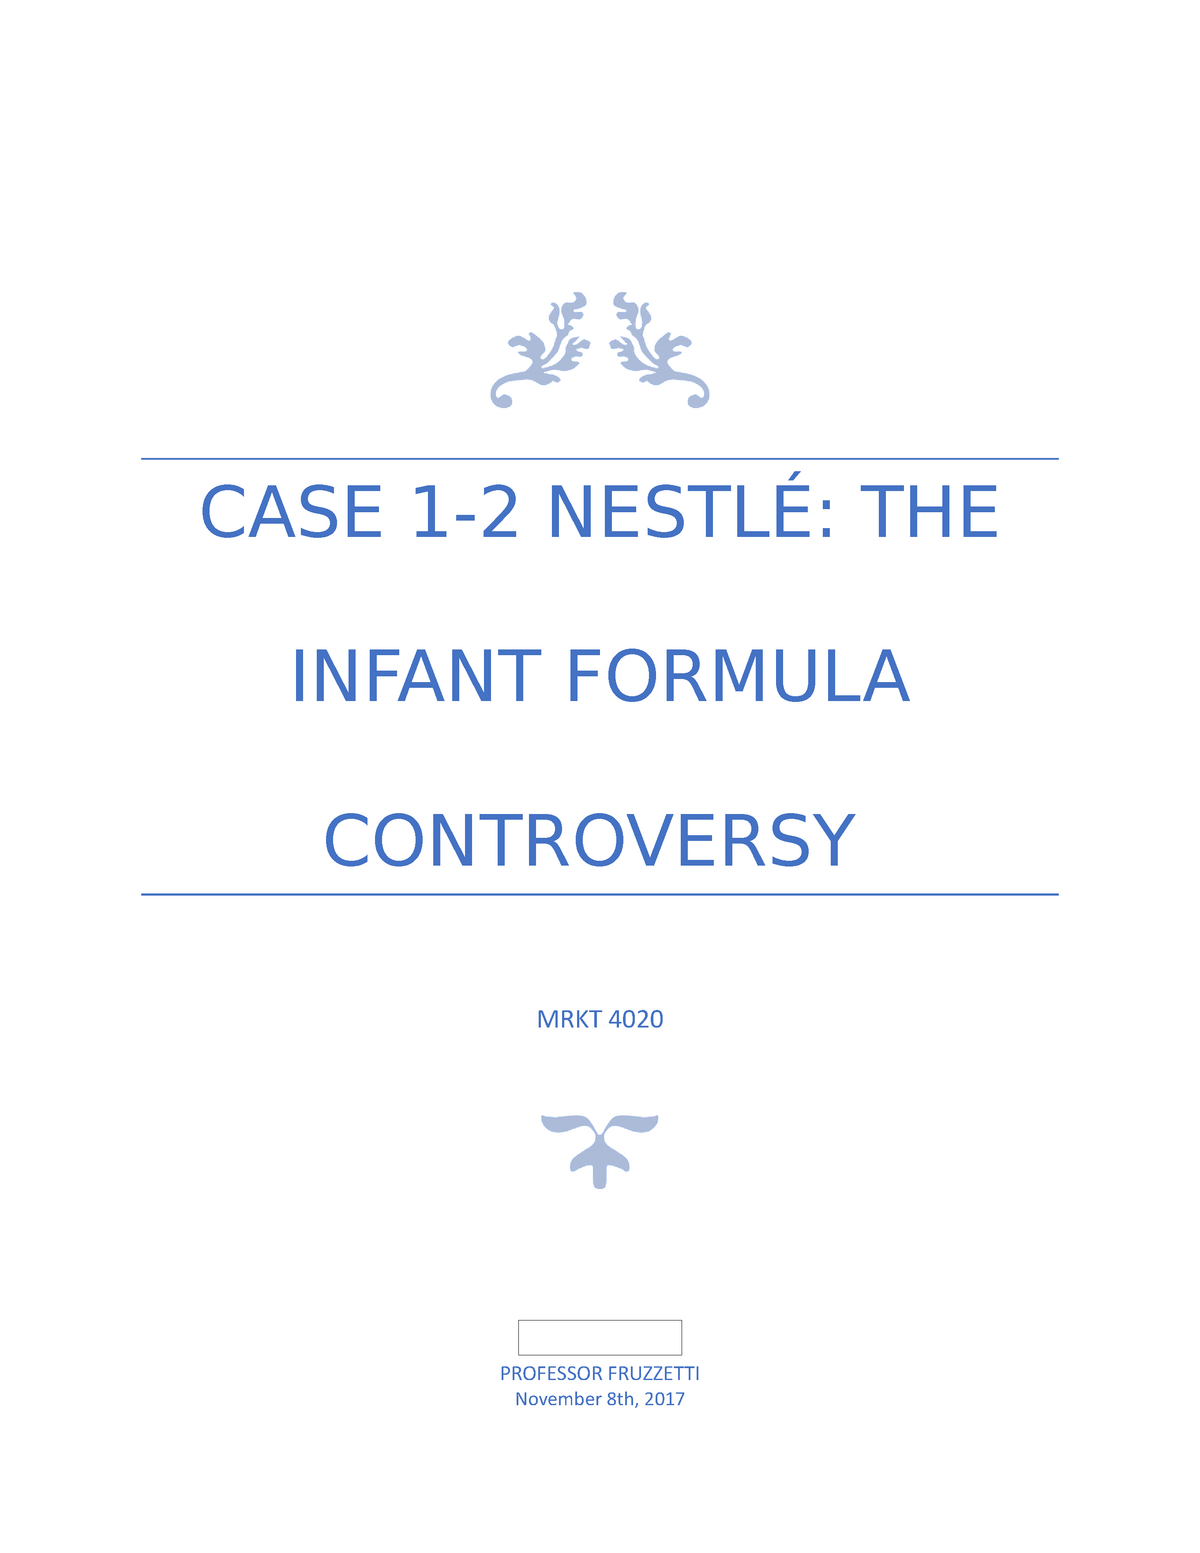 nestle the infant formula controversy case study answers